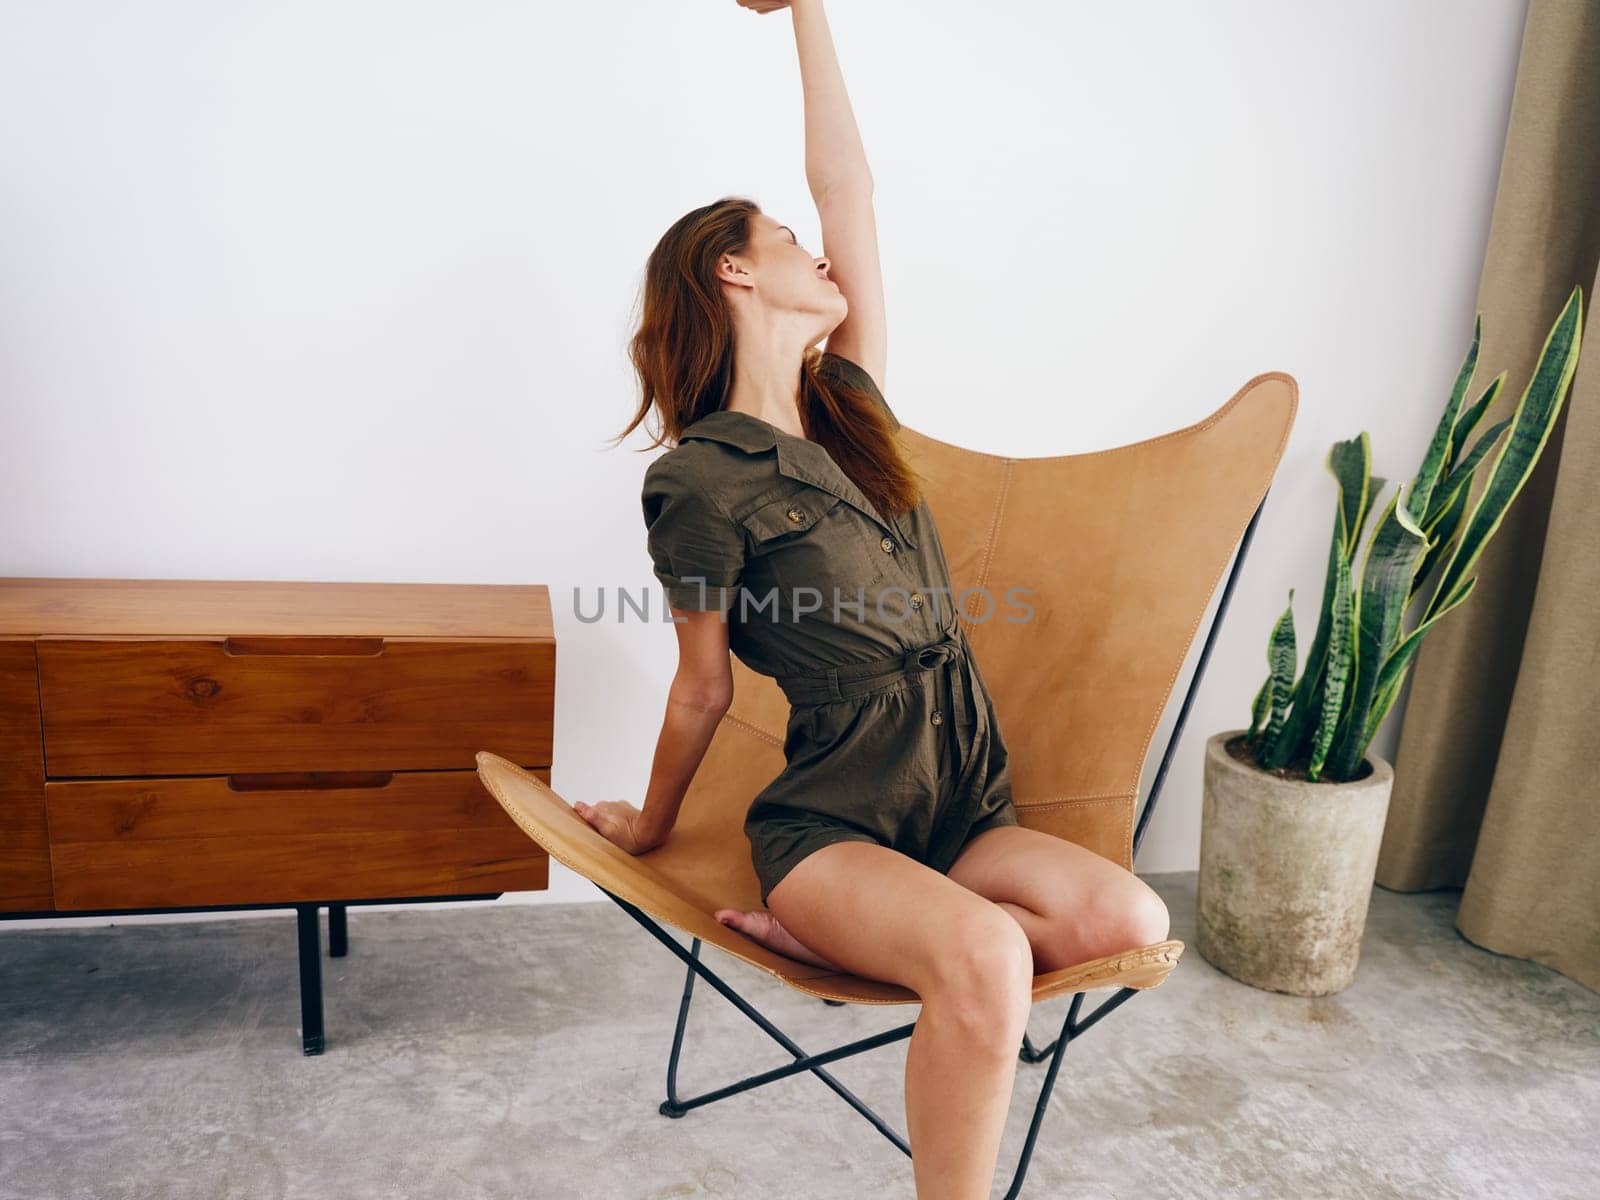 Woman model sits on a chair at home smile, fun and relaxation, modern stylish interior scandia lifestyle, copy space. by SHOTPRIME